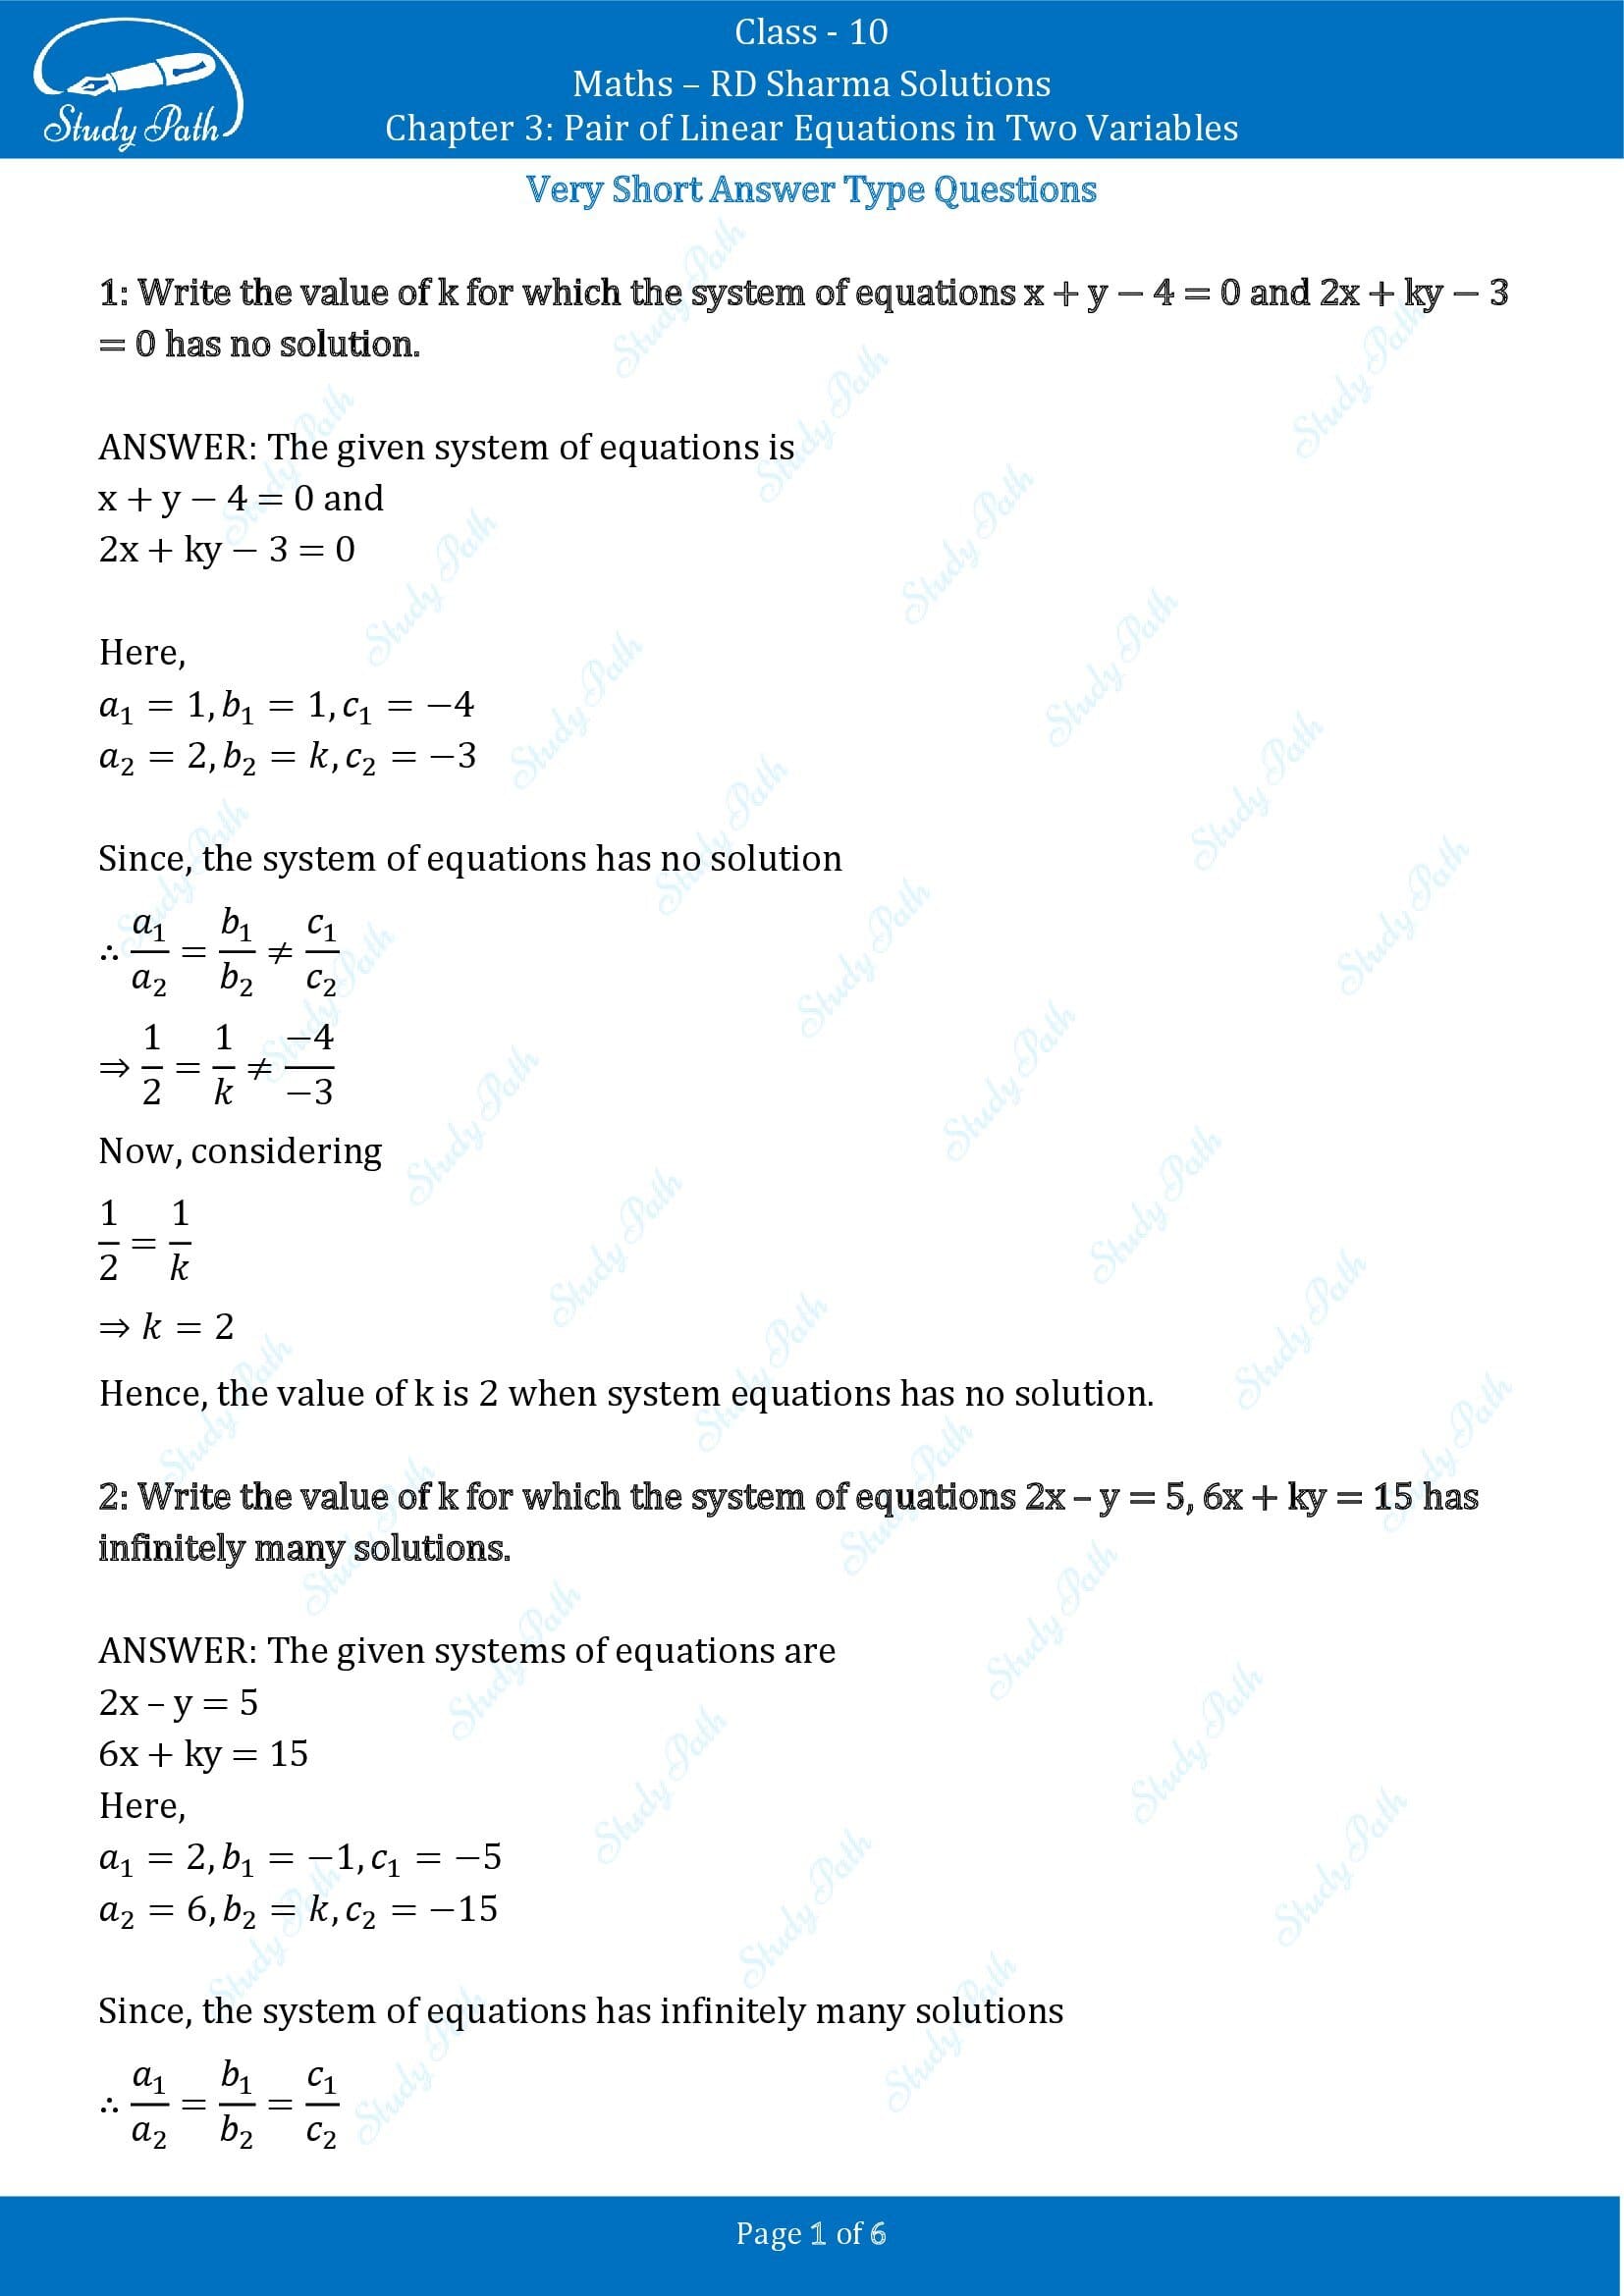 RD Sharma Solutions Class 10 Chapter 3 Pair of Linear Equations in Two Variables Very Short Answer Type Questions VSAQs 00001